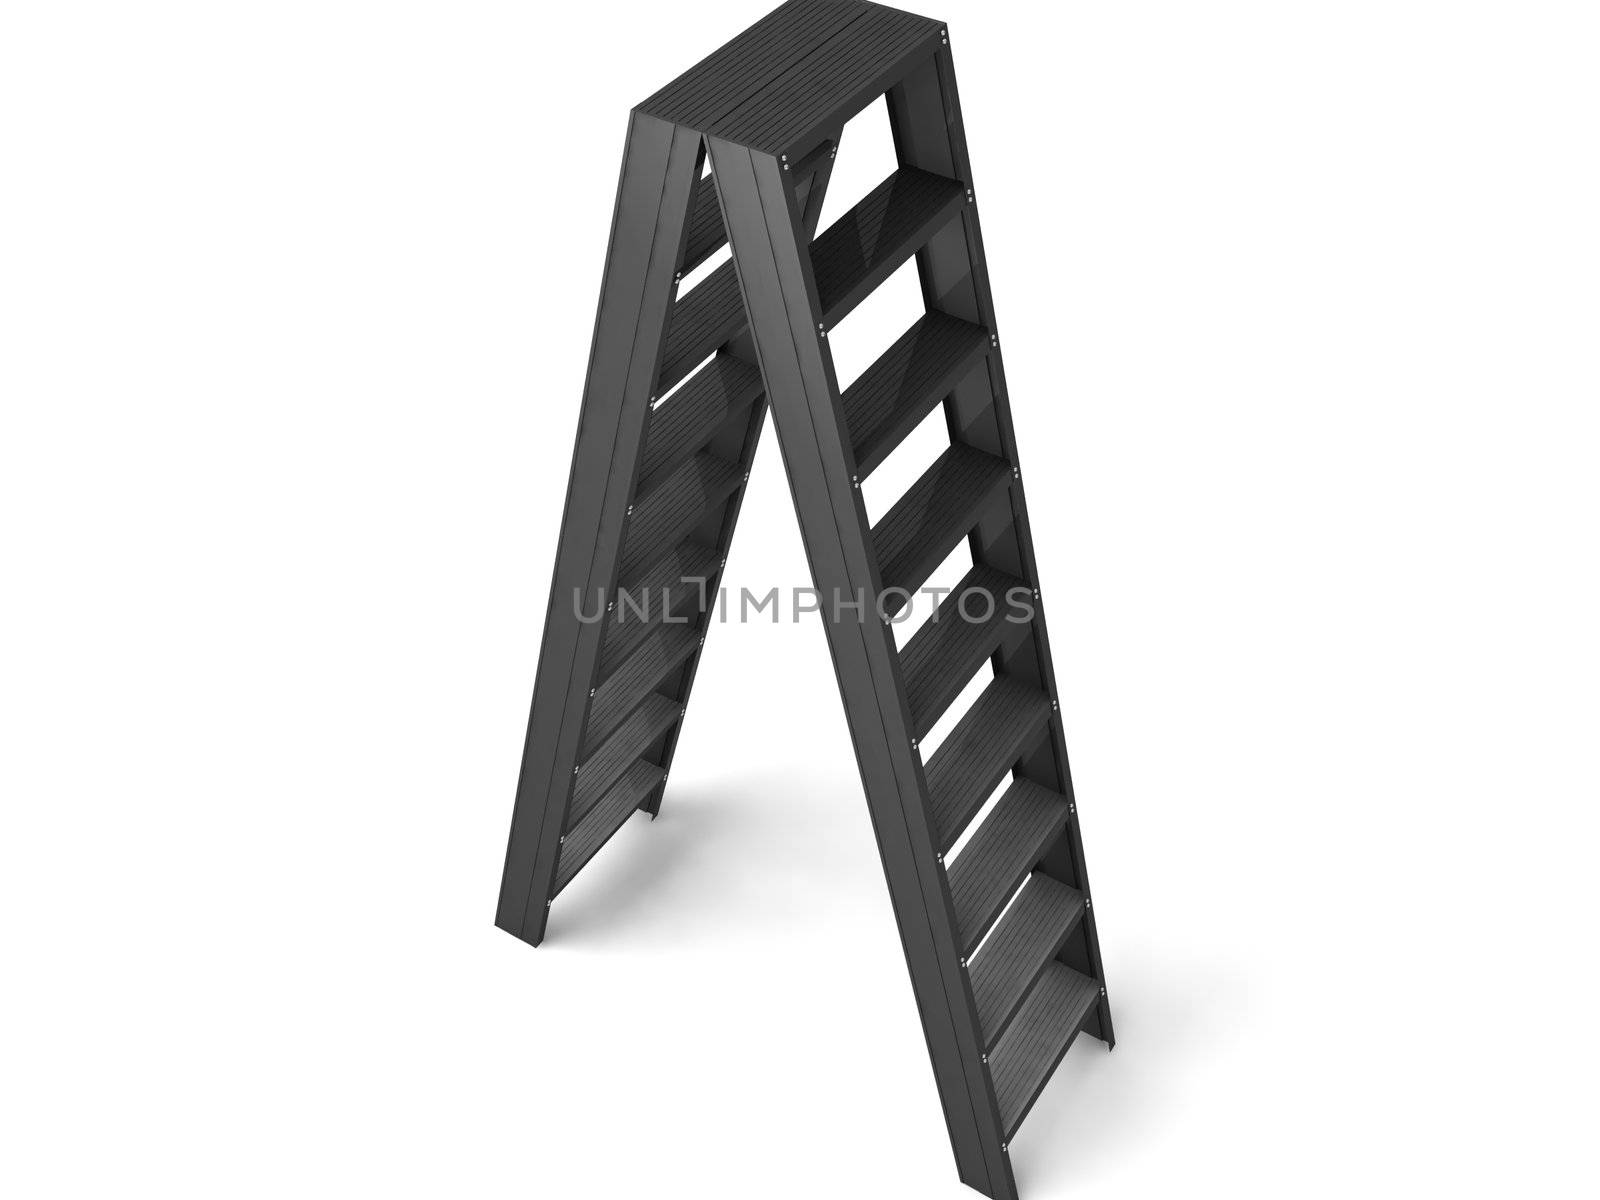 rendered three dimensional ladder case by imagerymajestic